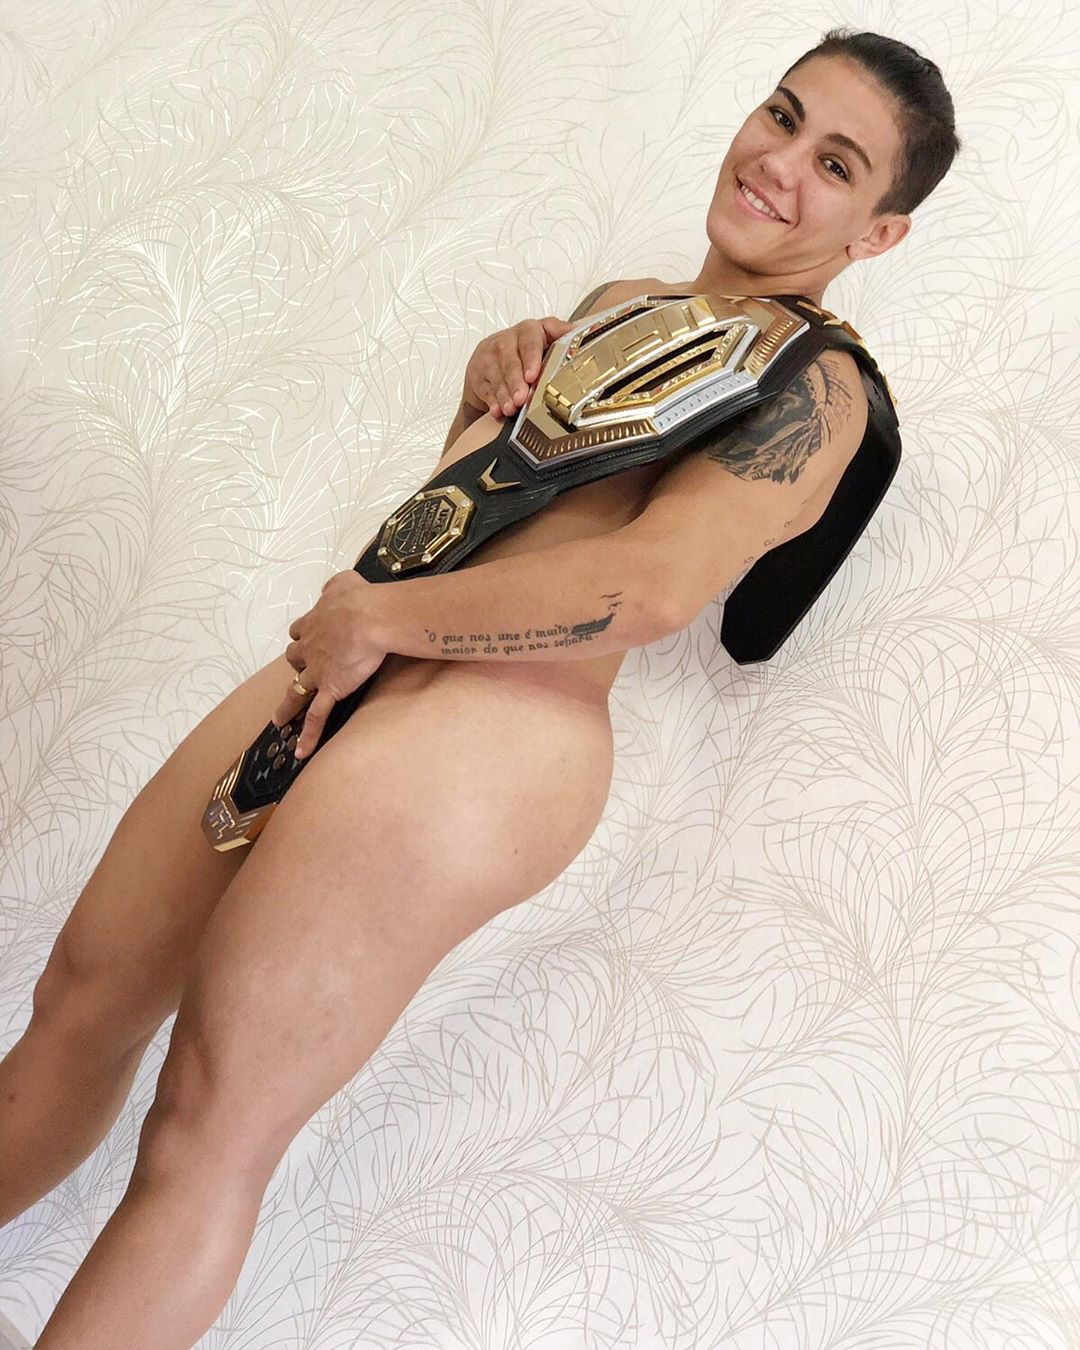 New UFC champ Jessica Andrade poses naked with just belt covering her  modesty to celebrate title win